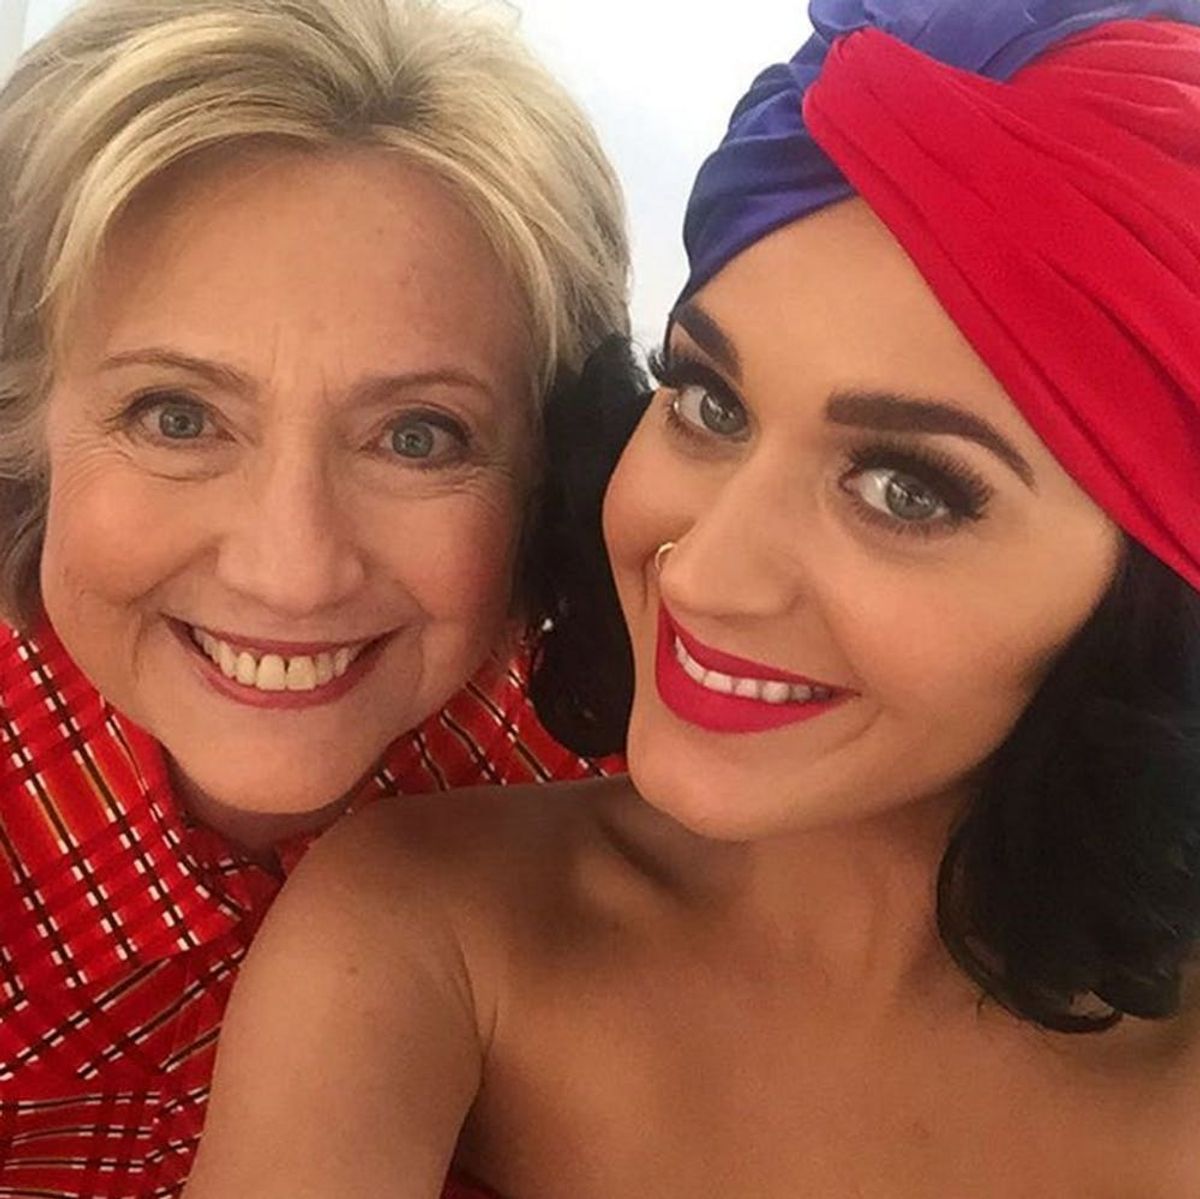 Katy Perry Just Gave Hillary Clinton the Most Bad Ass Birthday Present